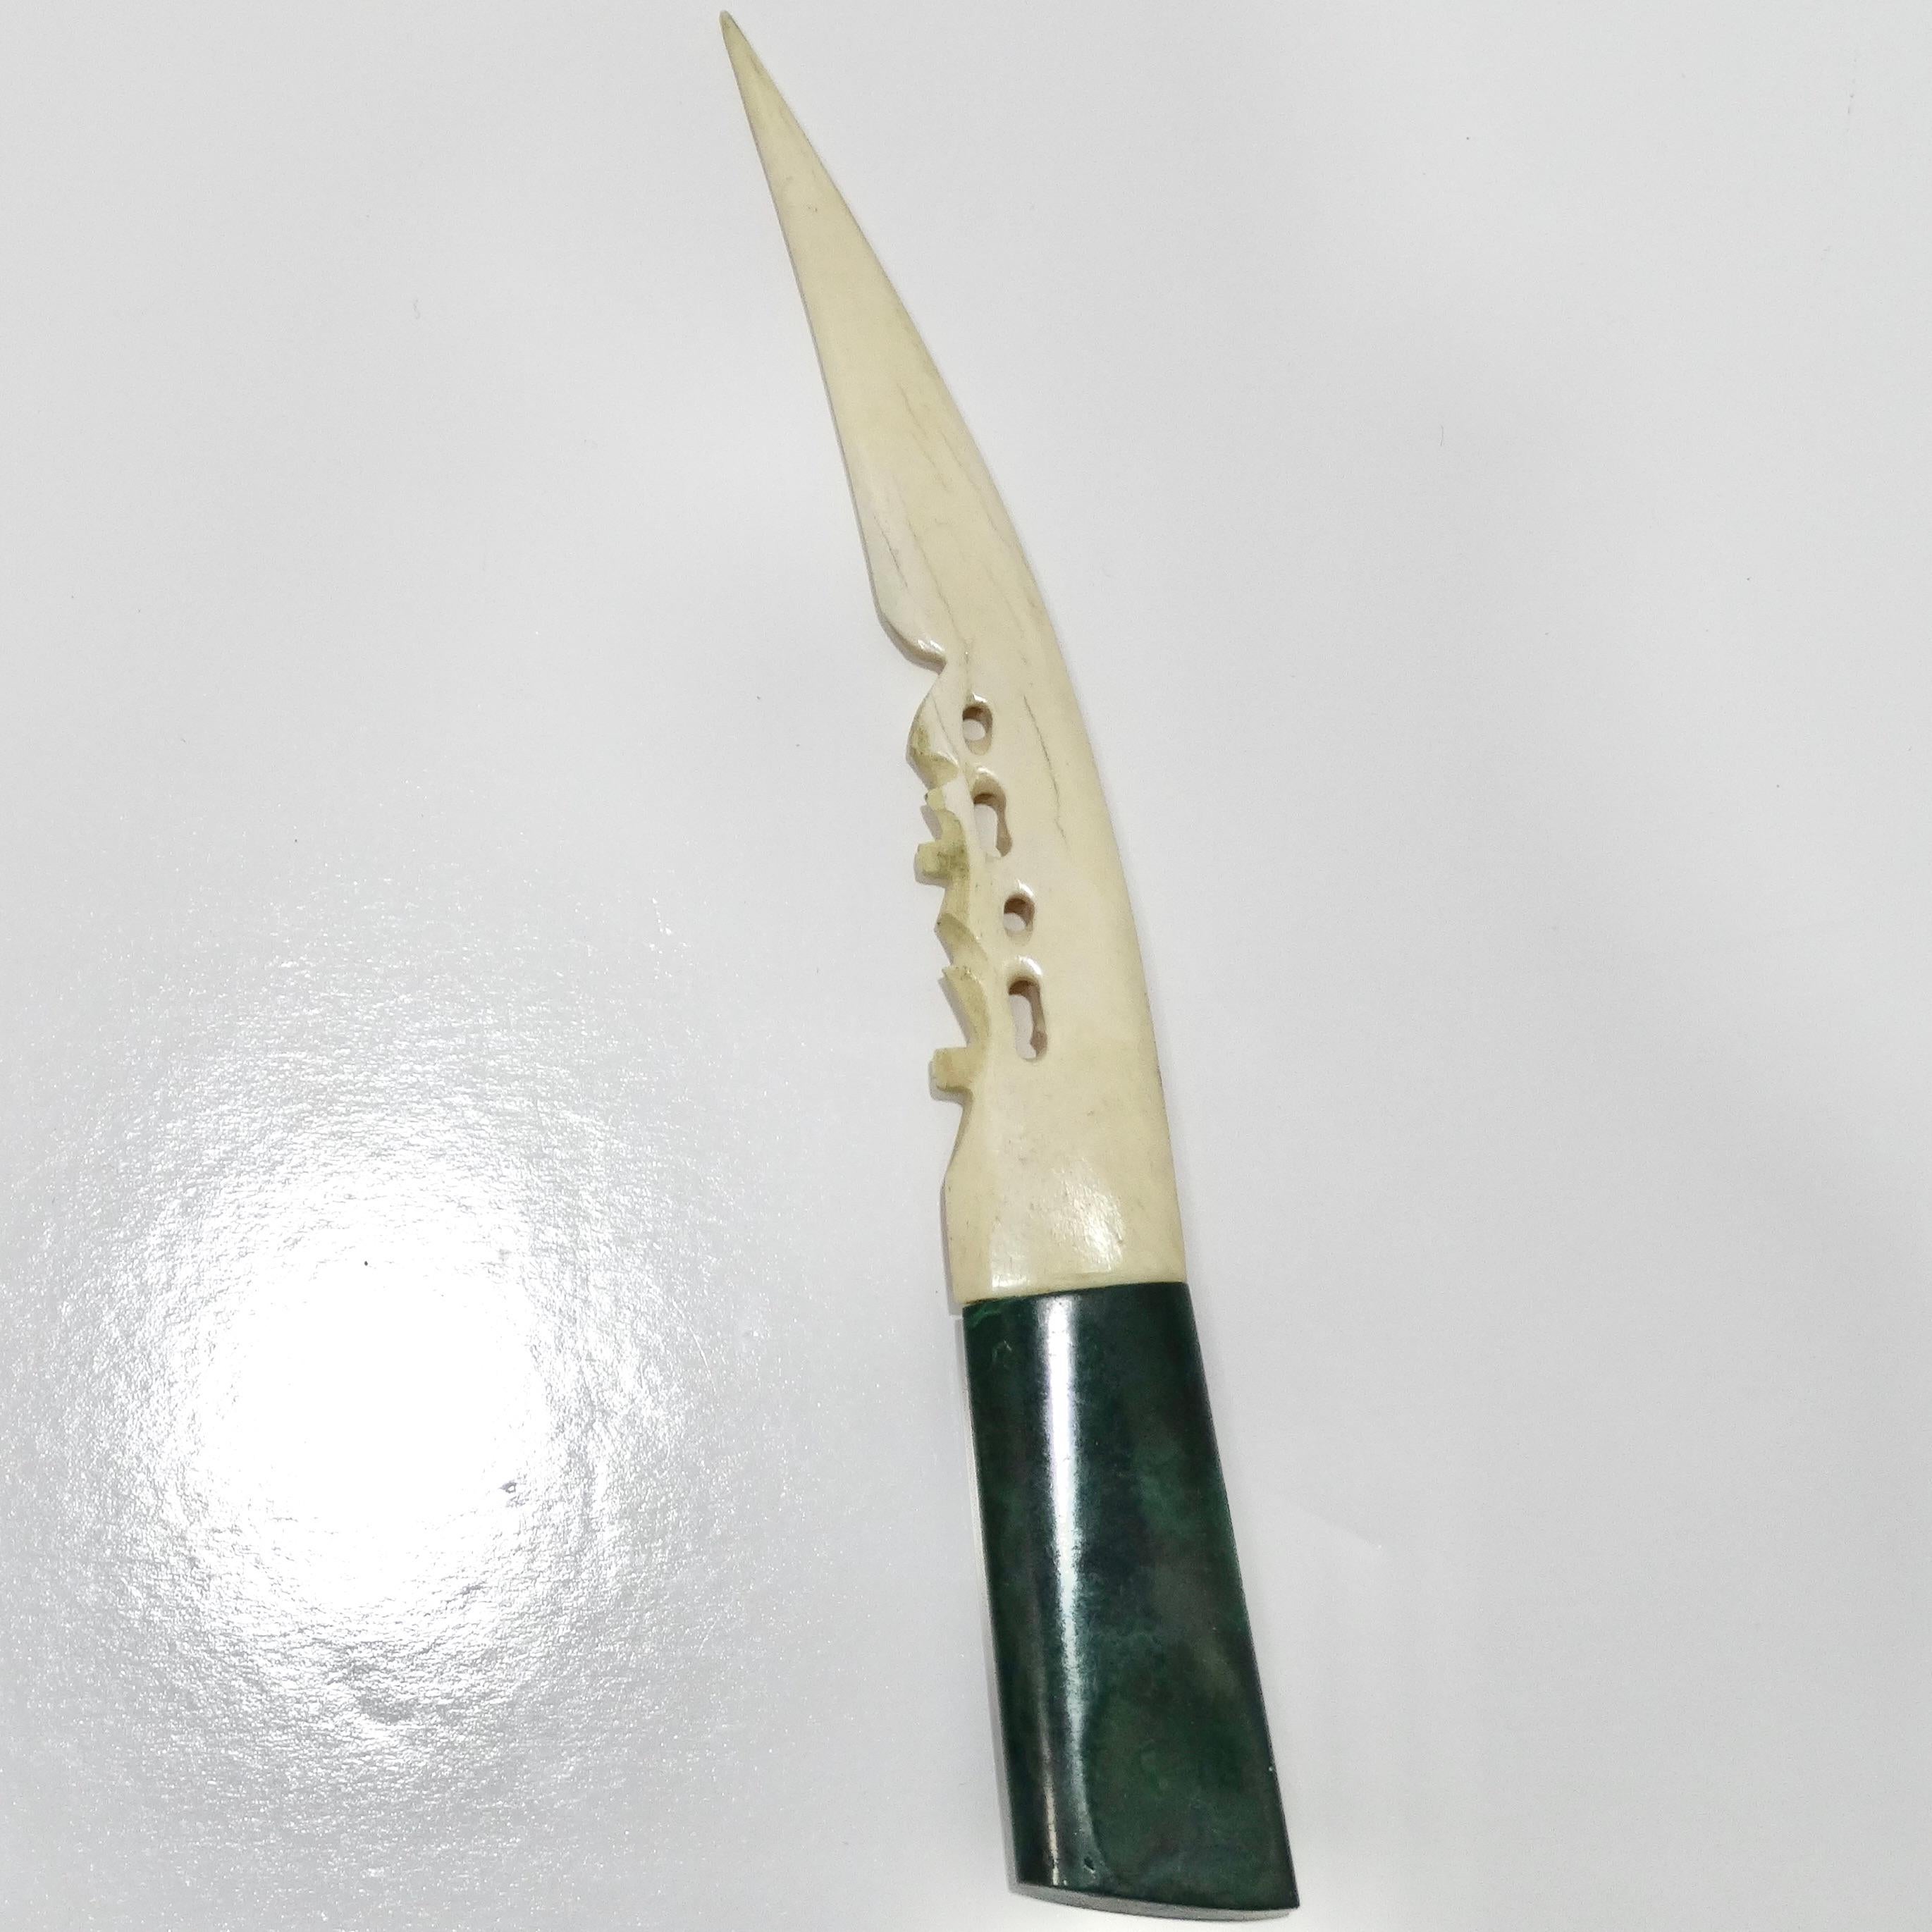 Introducing the Antique Malachite Horn Letter Opener, a magnificent piece from the early 1900s that combines opulent materials with exquisite craftsmanship.

Crafted with meticulous attention to detail, this letter opener features a blade made of